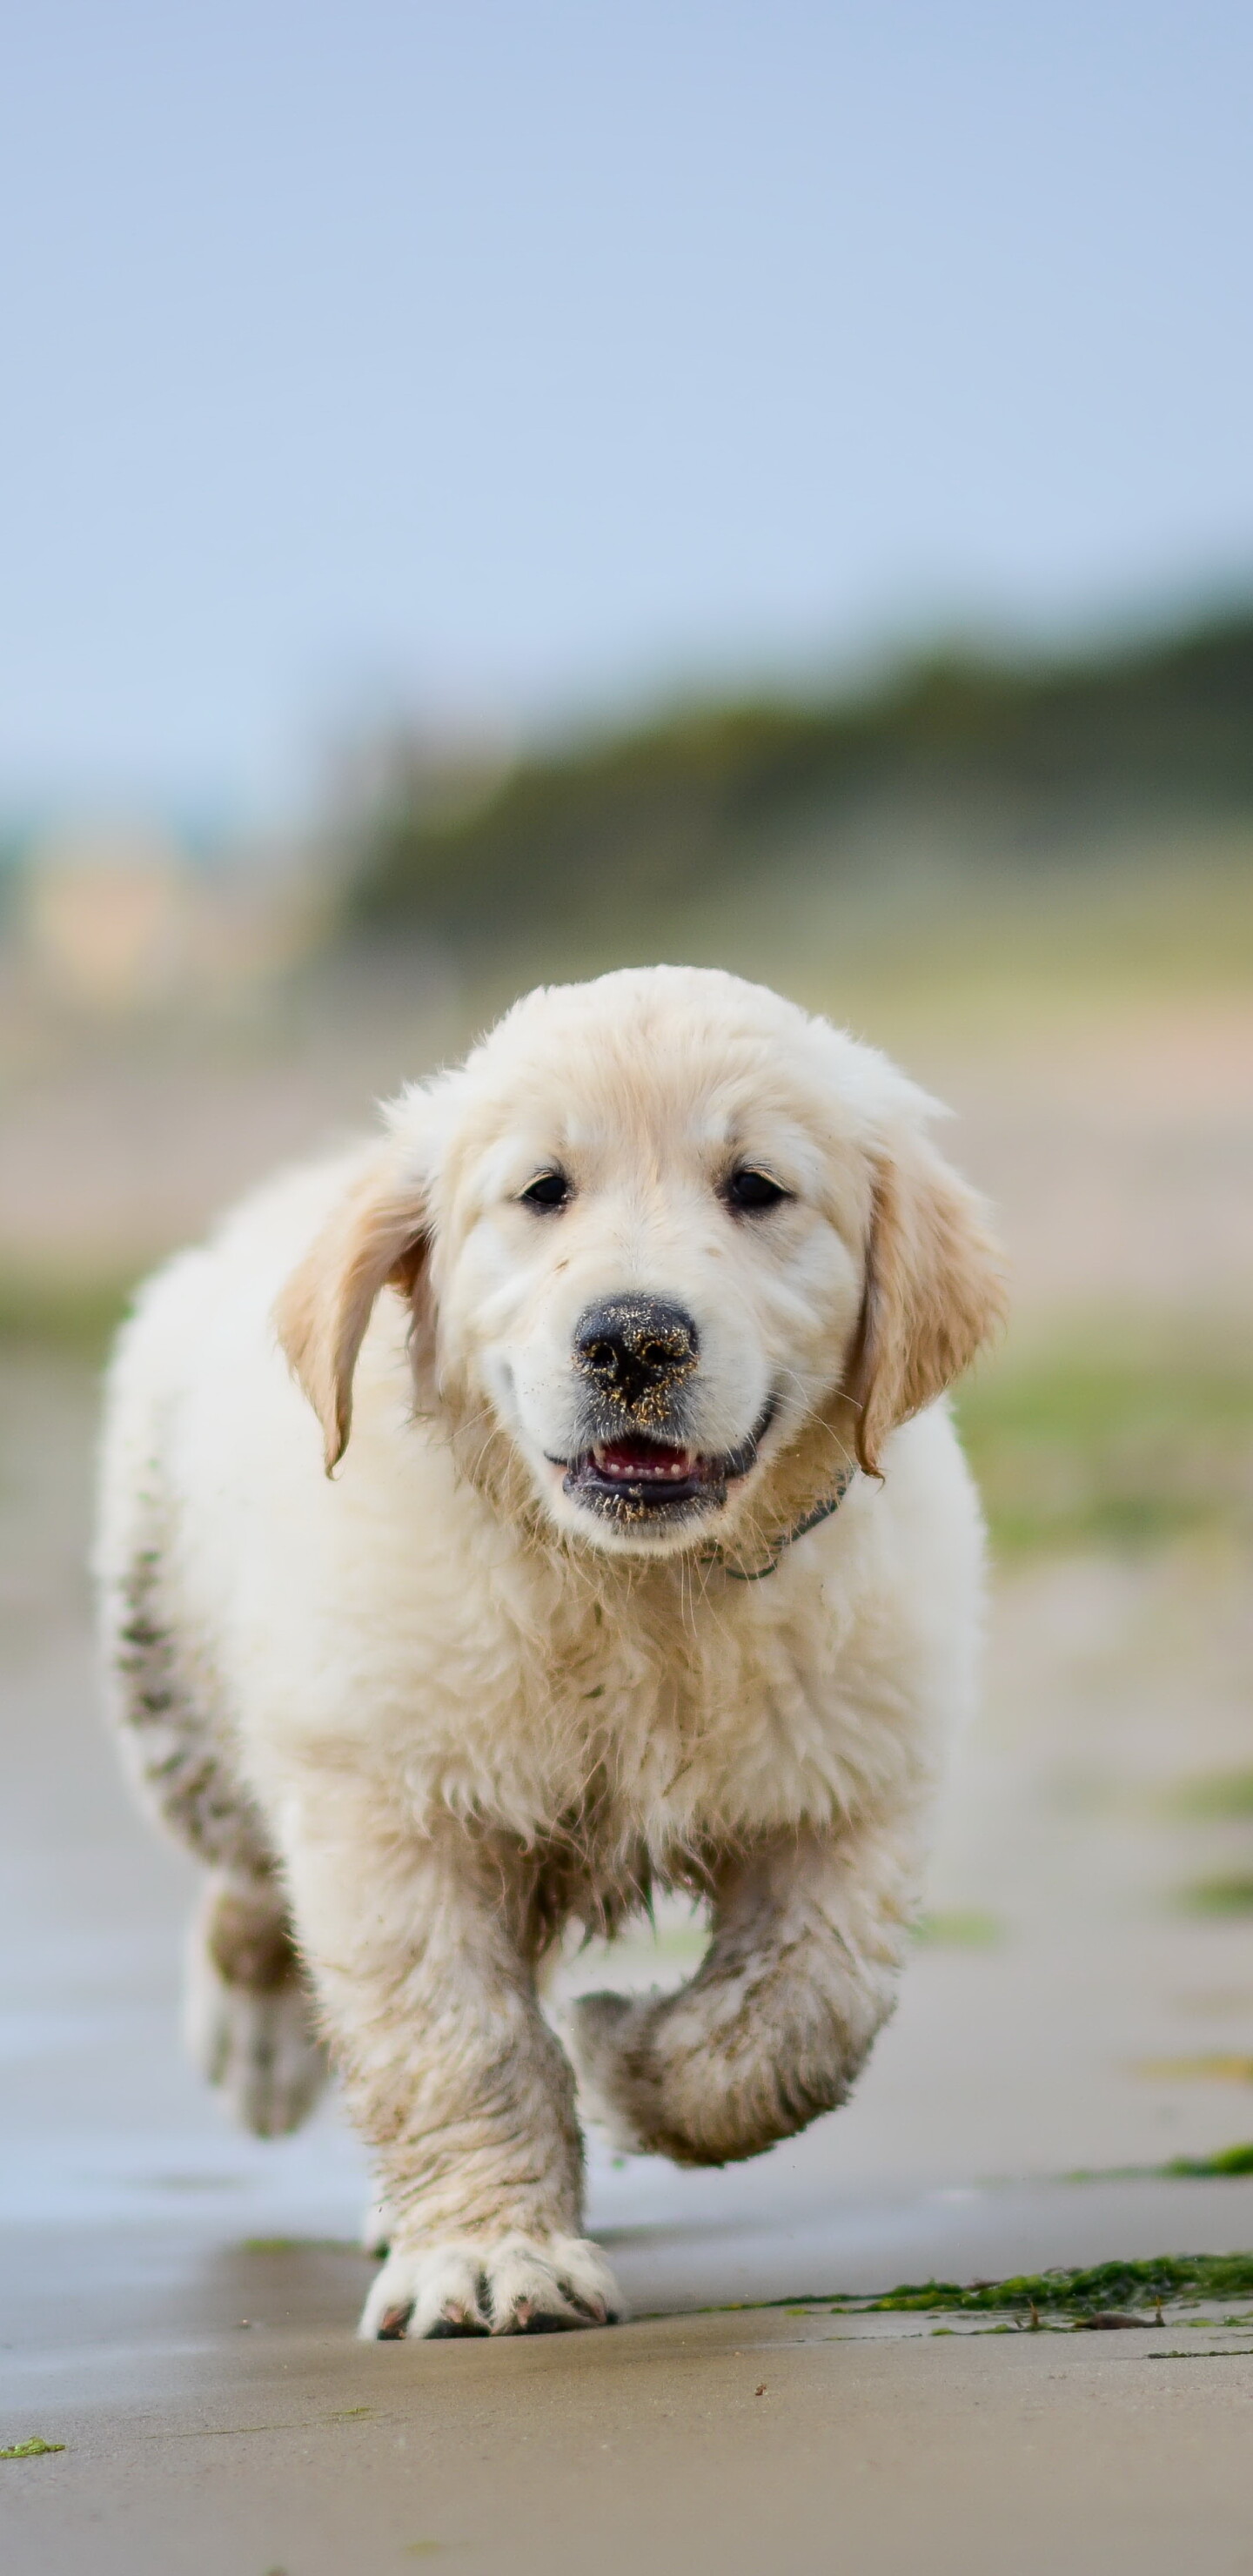 Golden Retriever: Puppy, Frequent competitor in dog shows and obedience trials, Dog breed. 1440x2960 HD Wallpaper.